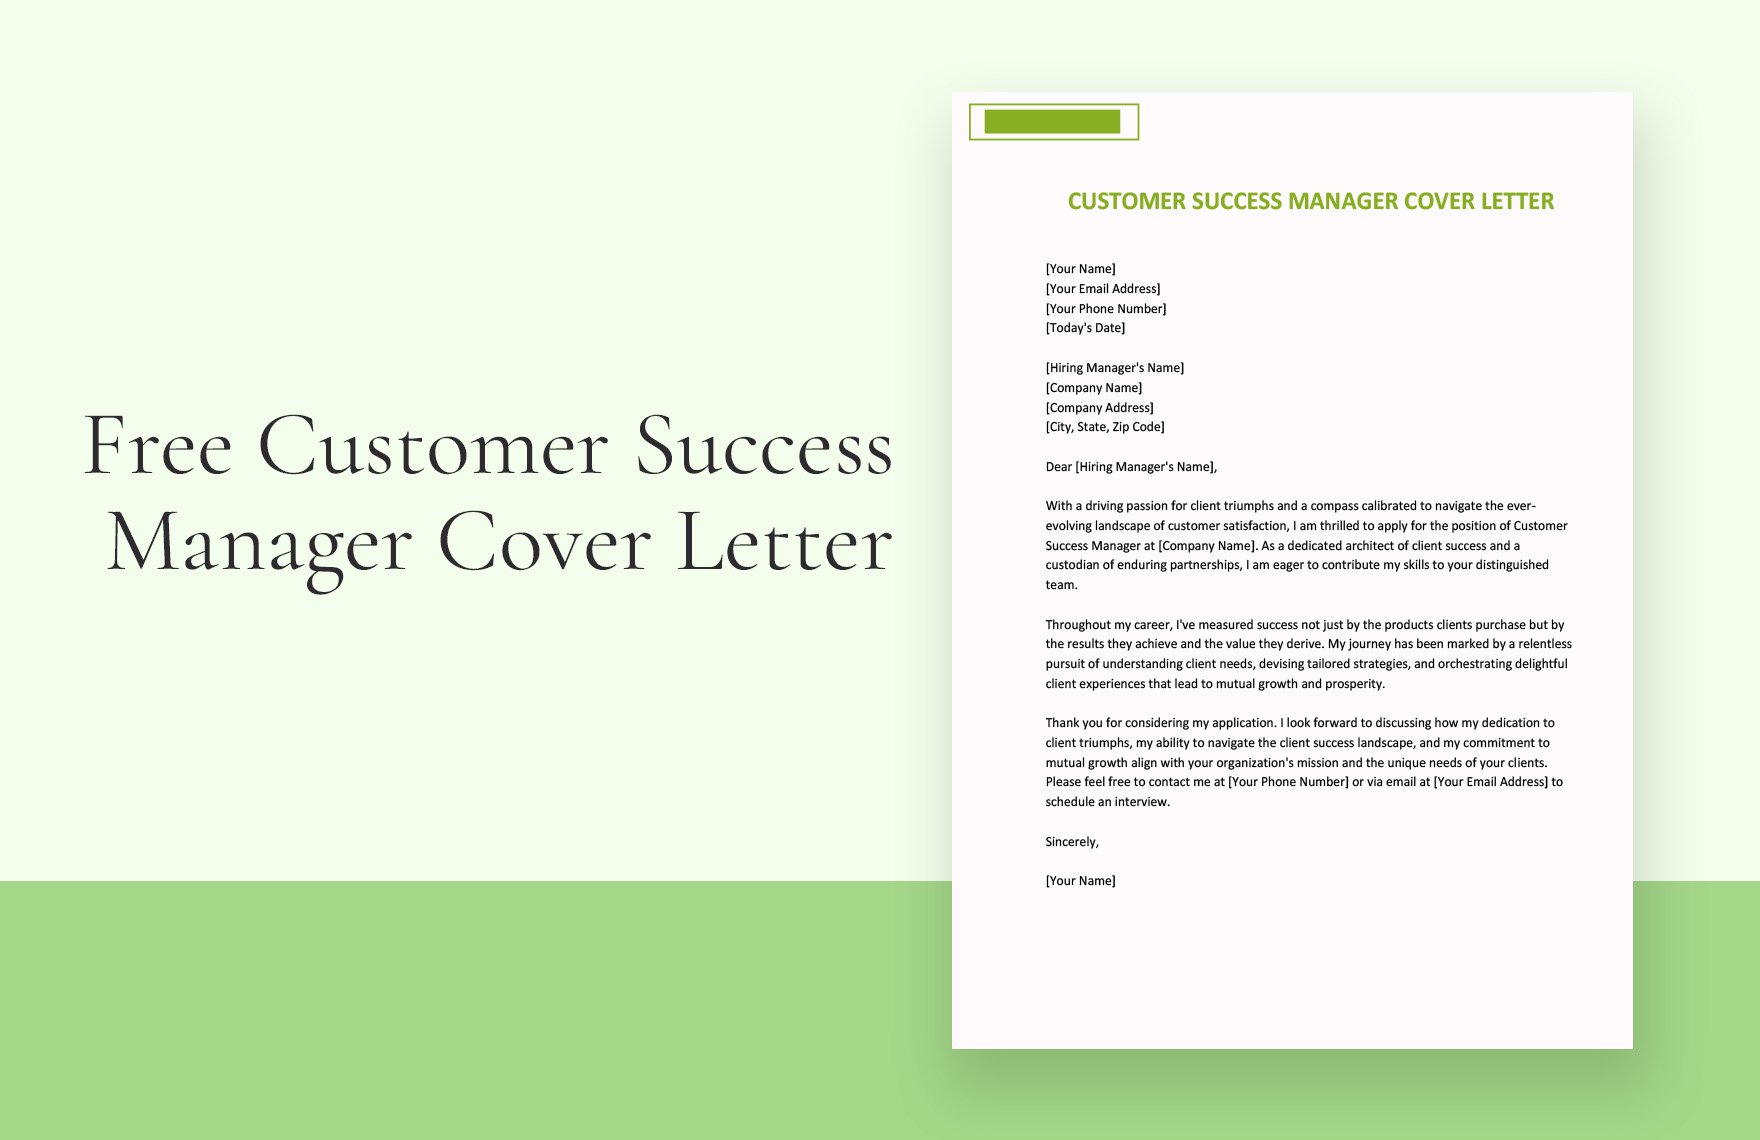 Customer Success Manager Cover Letter